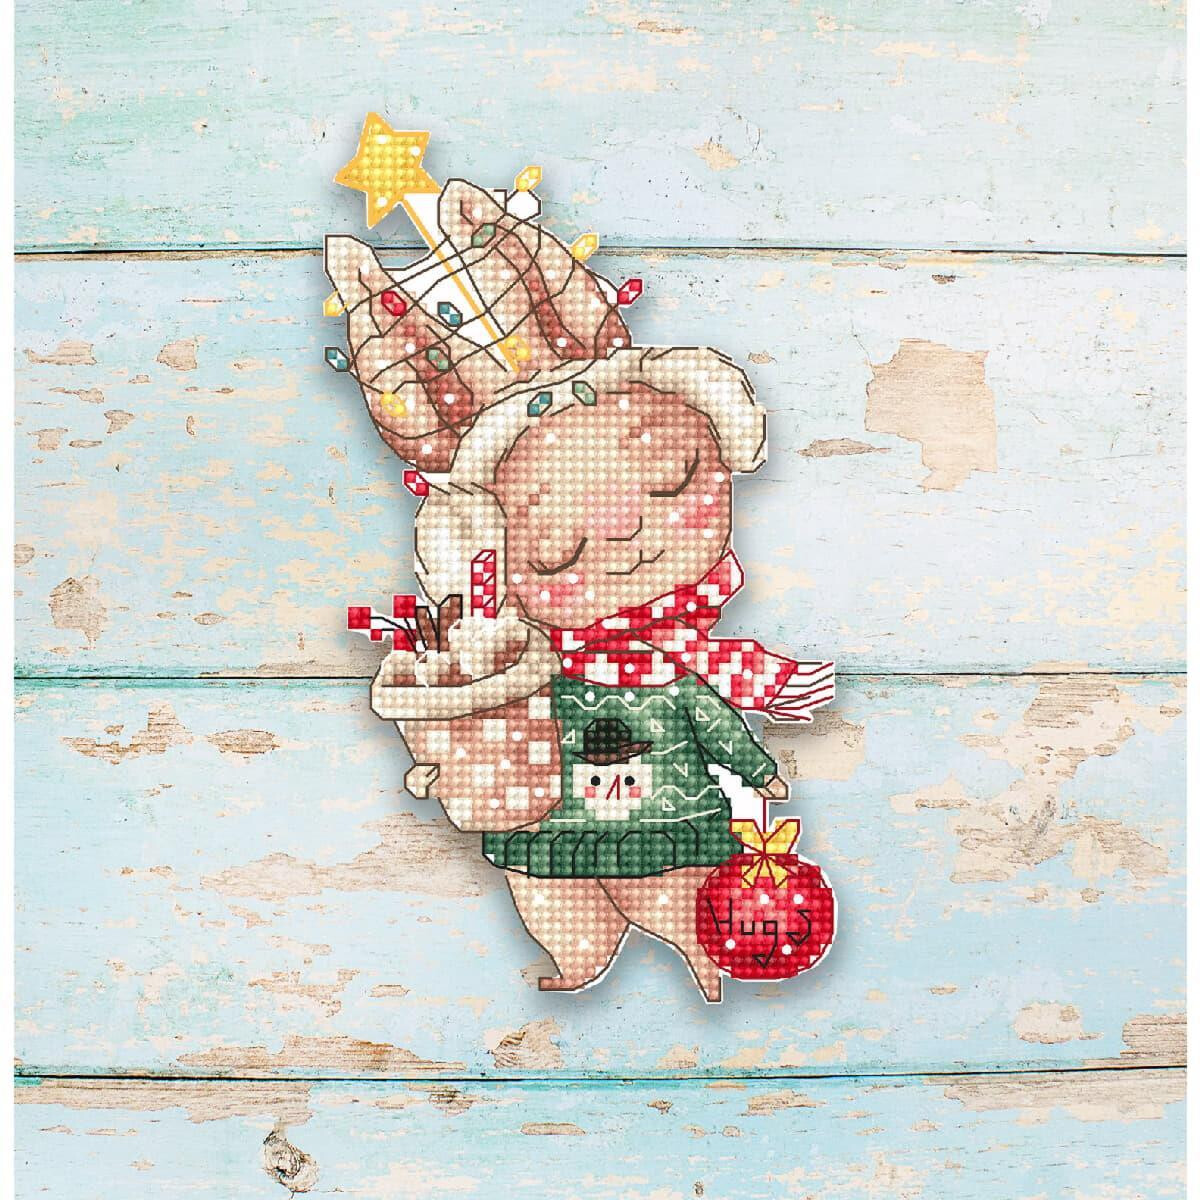 A pixel art Christmas figure with rosy cheeks and closed...